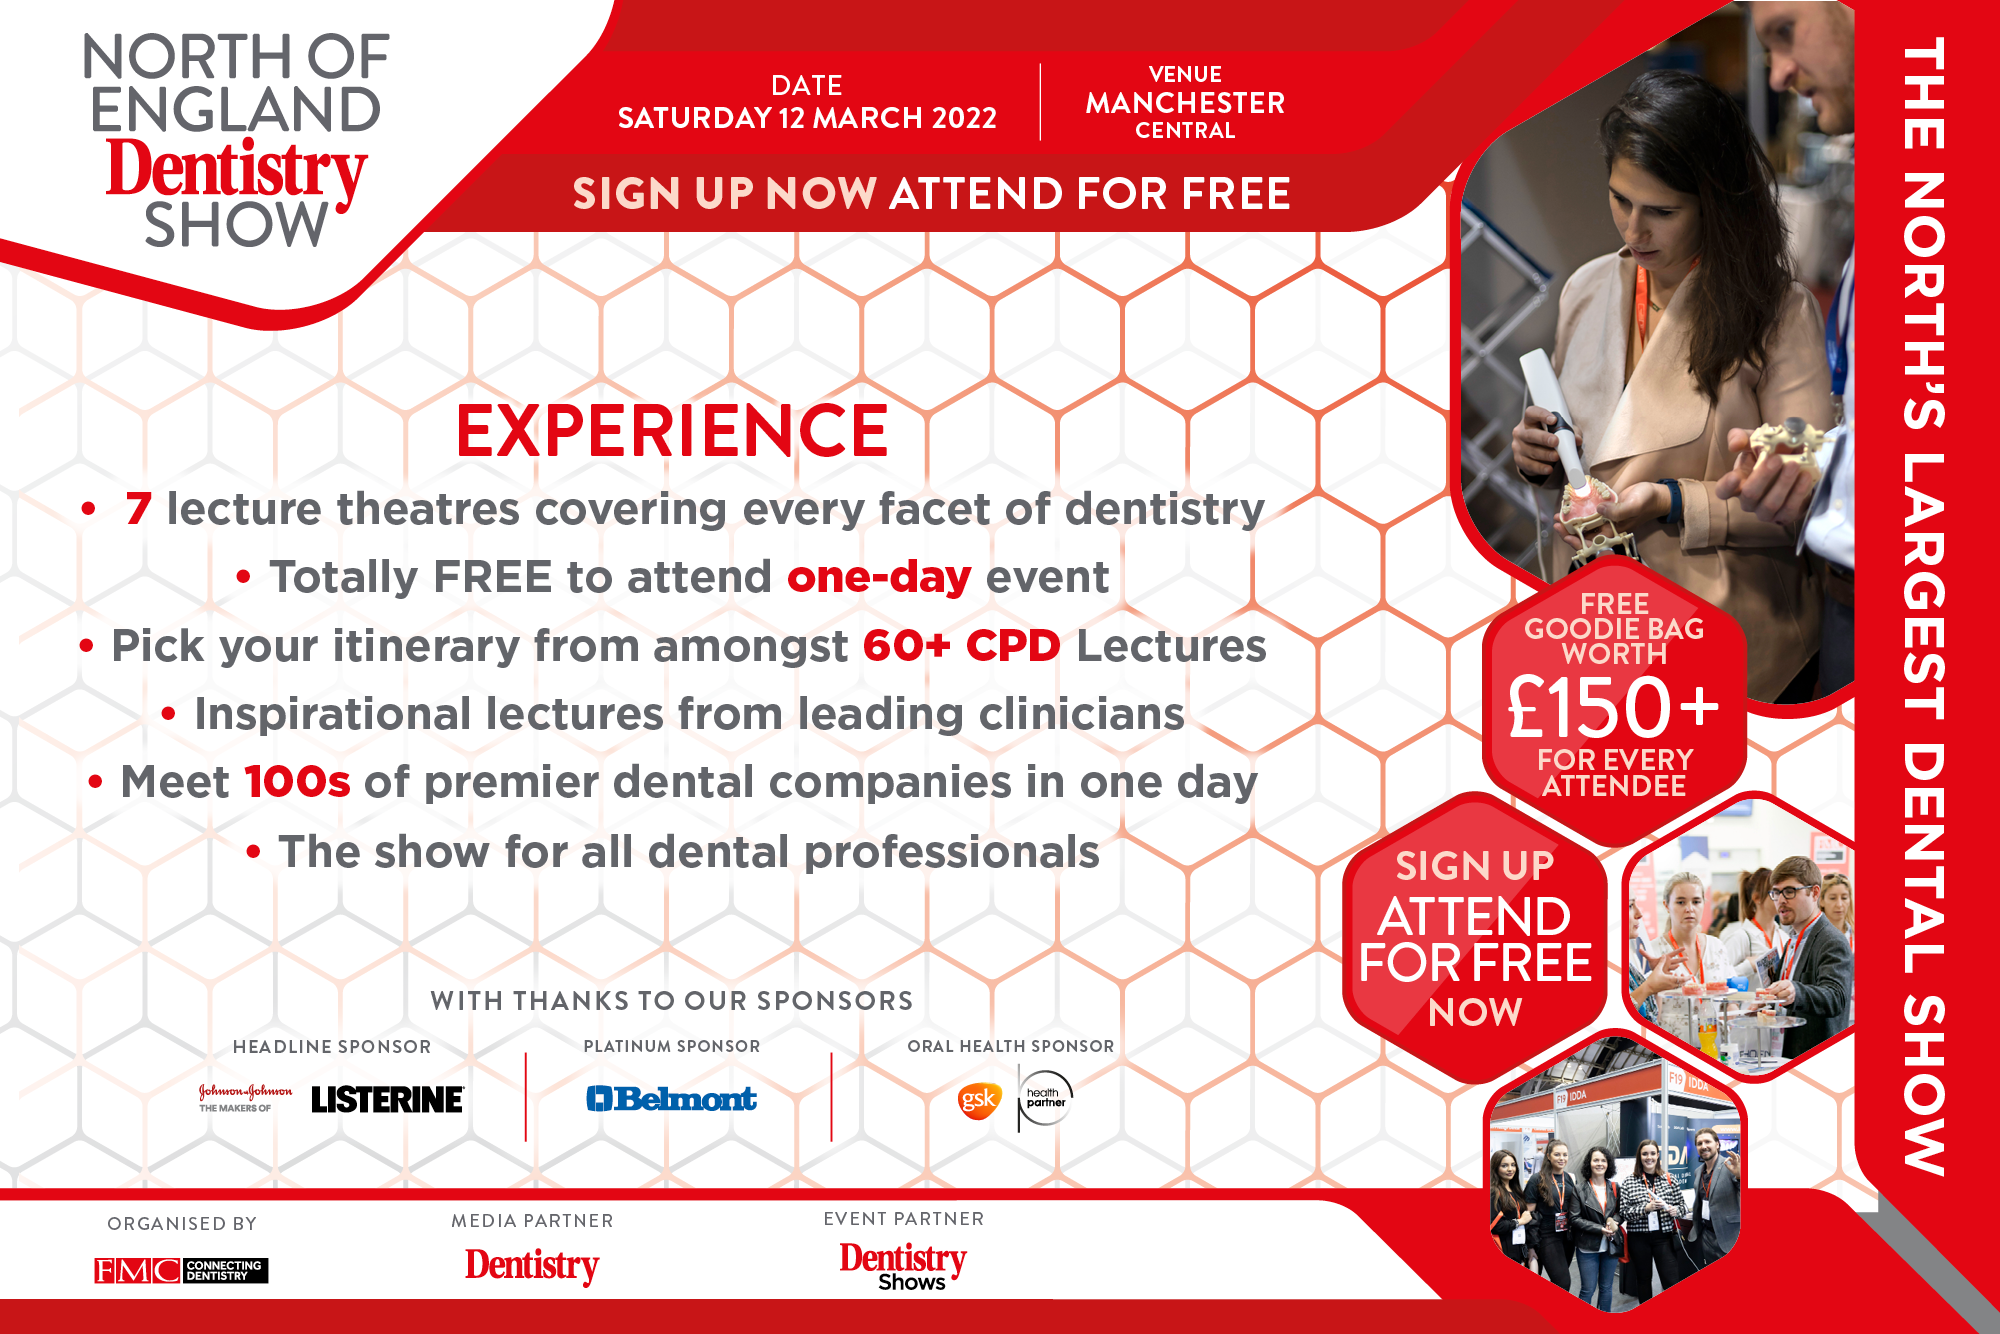 Back for 2022 – the North of England Dentistry Show